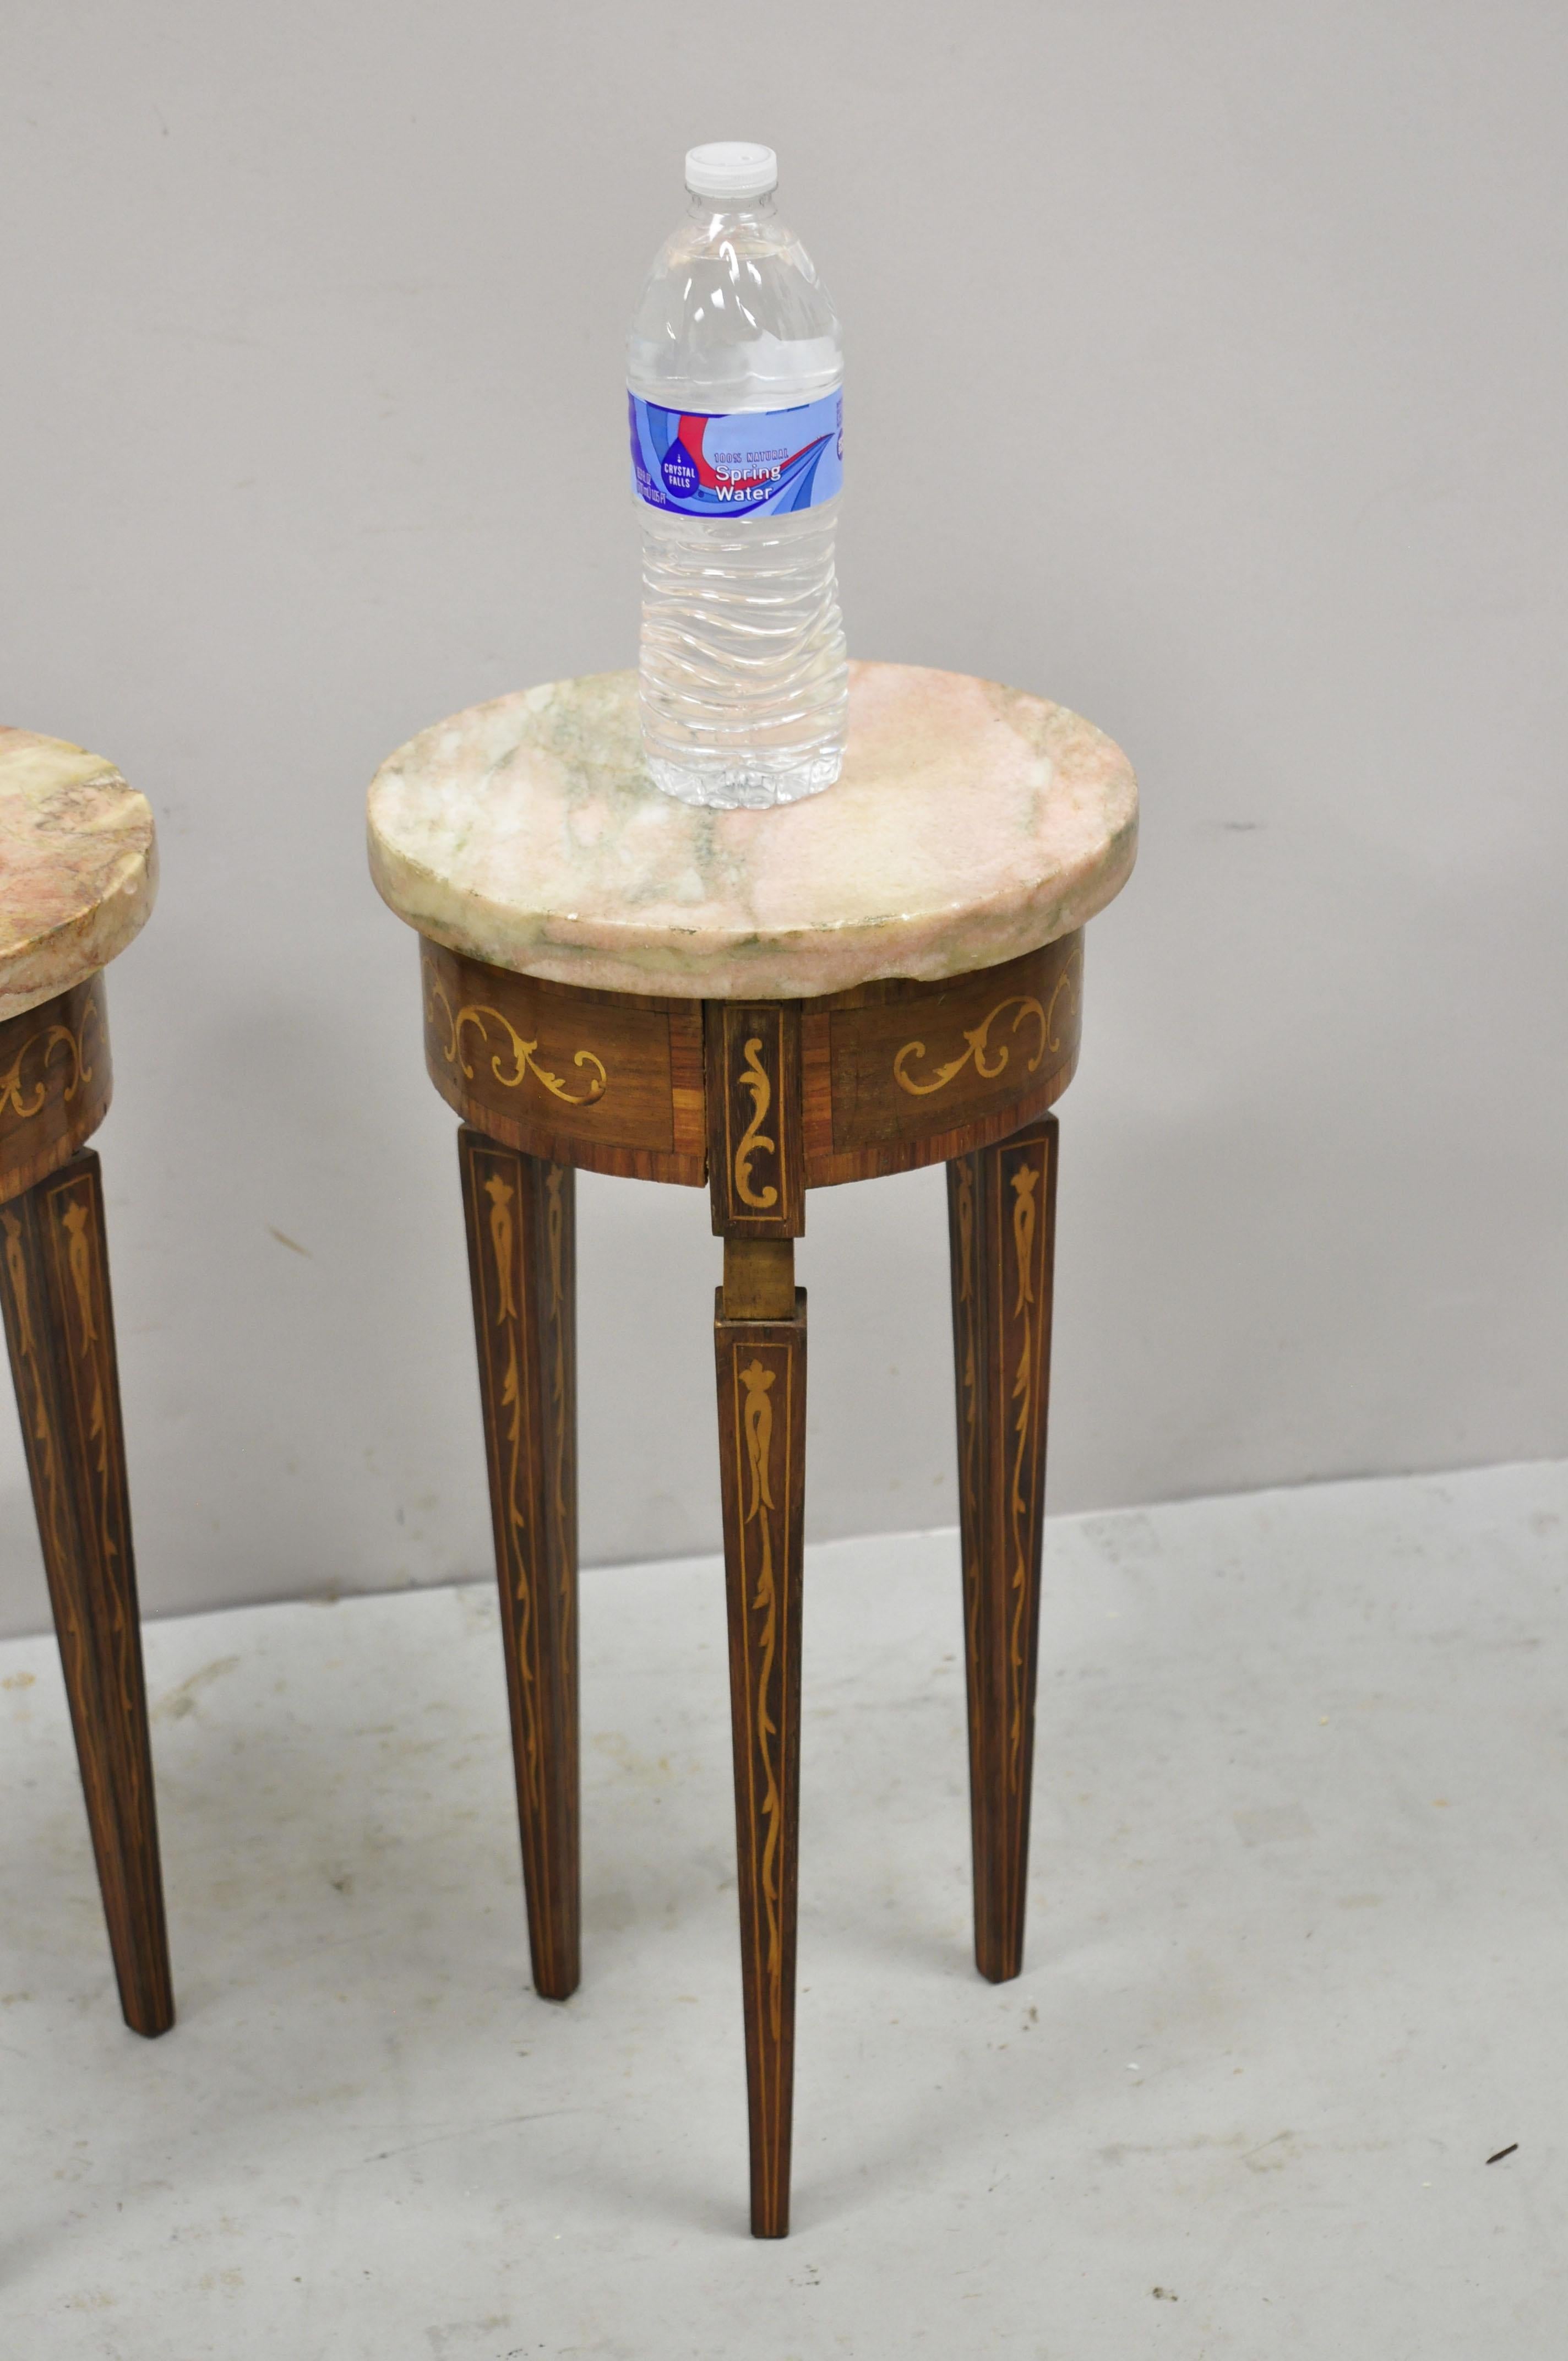 Vintage Italian small petite pink marble top round satinwood inlaid side table - a Pair. Item features pink marble tops, satinwood inlay throughout, small petite size, very nice vintage pair, quality Italian craftsmanship, great style and form.